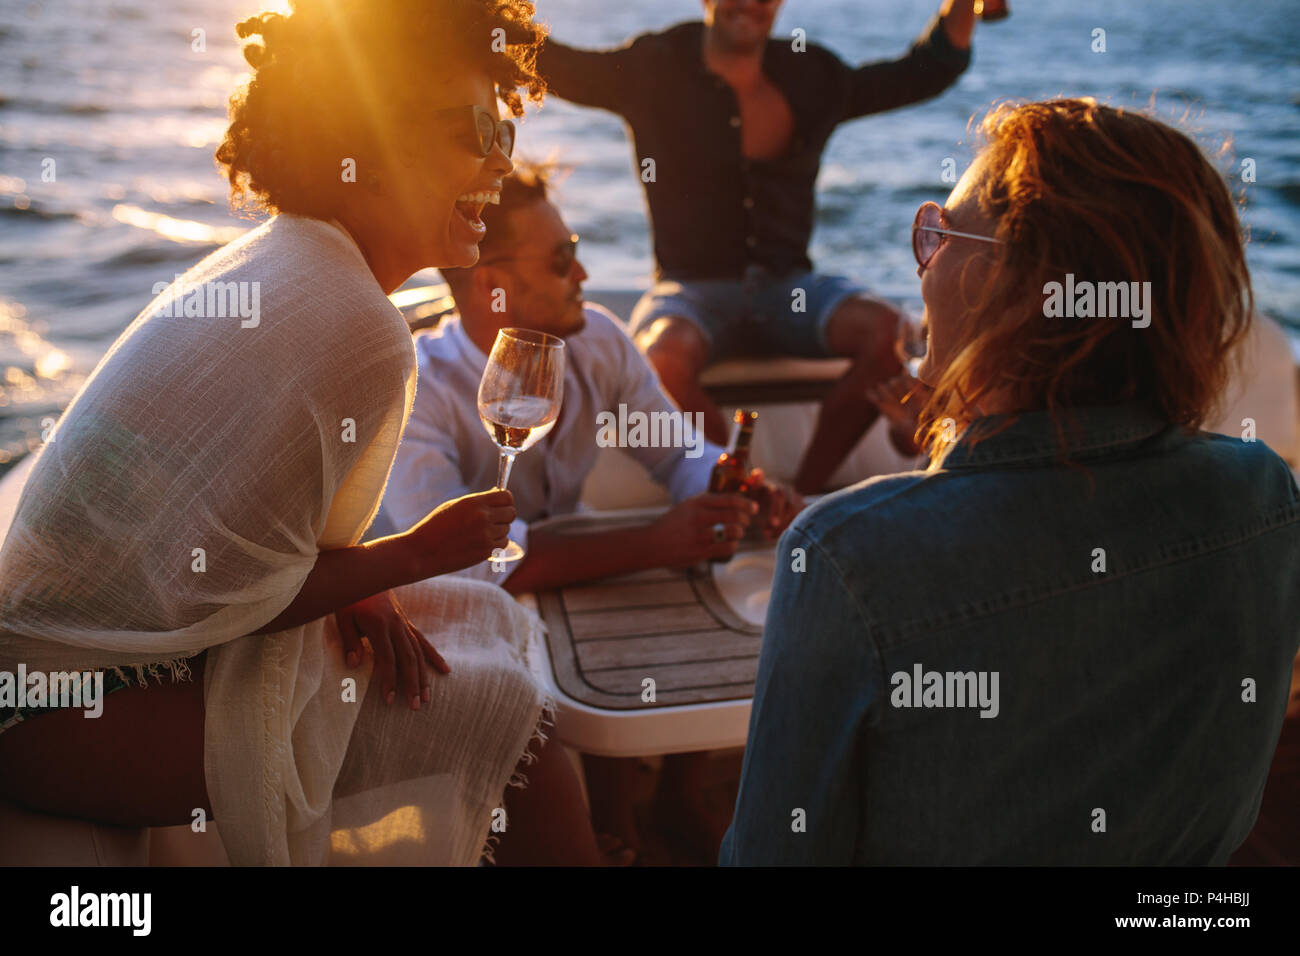 Cheerful young woman drinking wine while sitting with friends on a boat. Woman enjoying a boat party with friends. Stock Photo